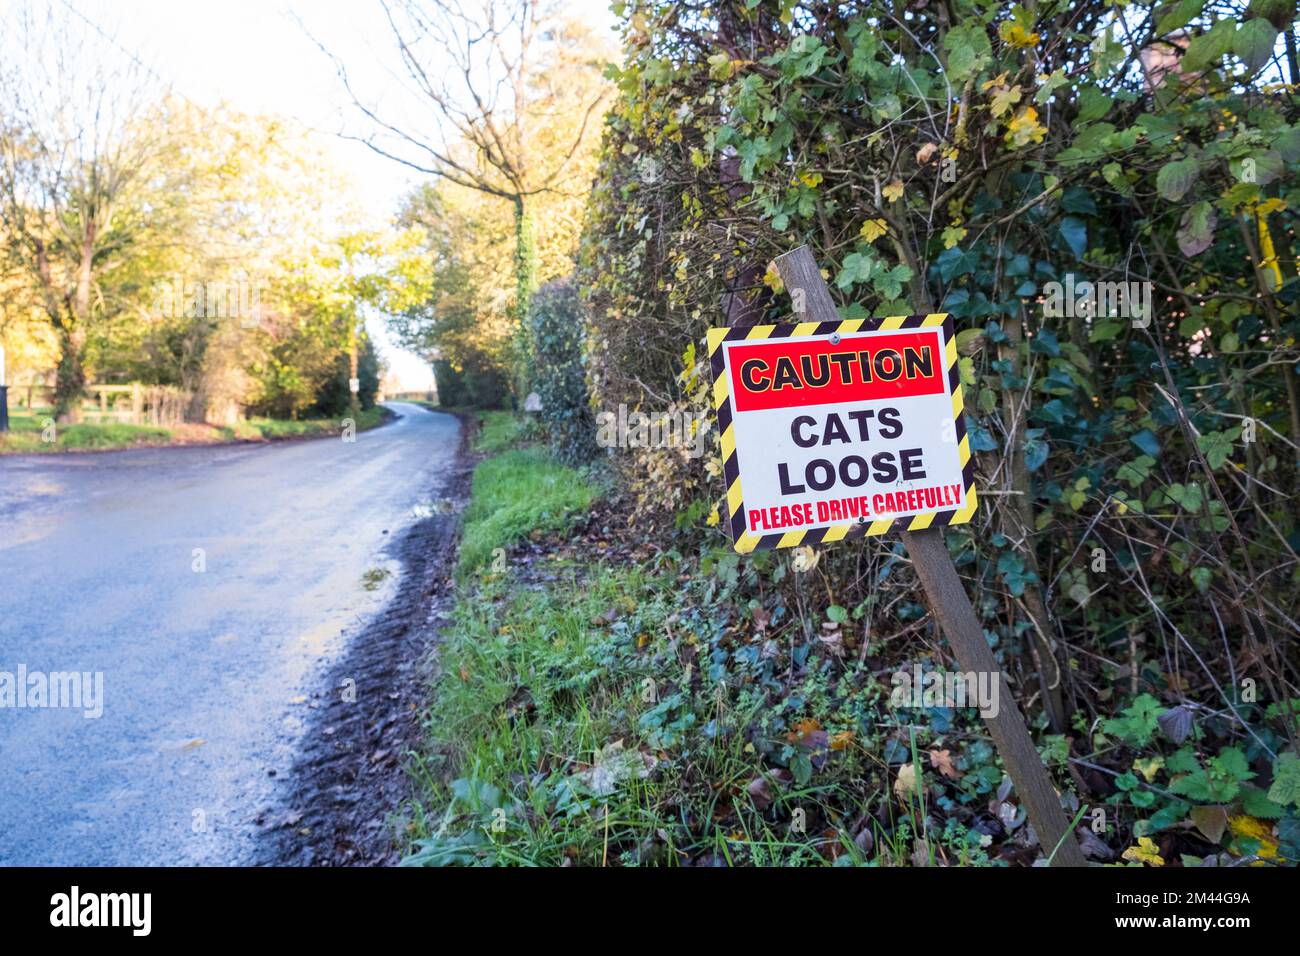 Caution cats loose please drive carefully sign.Cats crossing sign. On a roadside, Suffolk, UK. Stock Photo